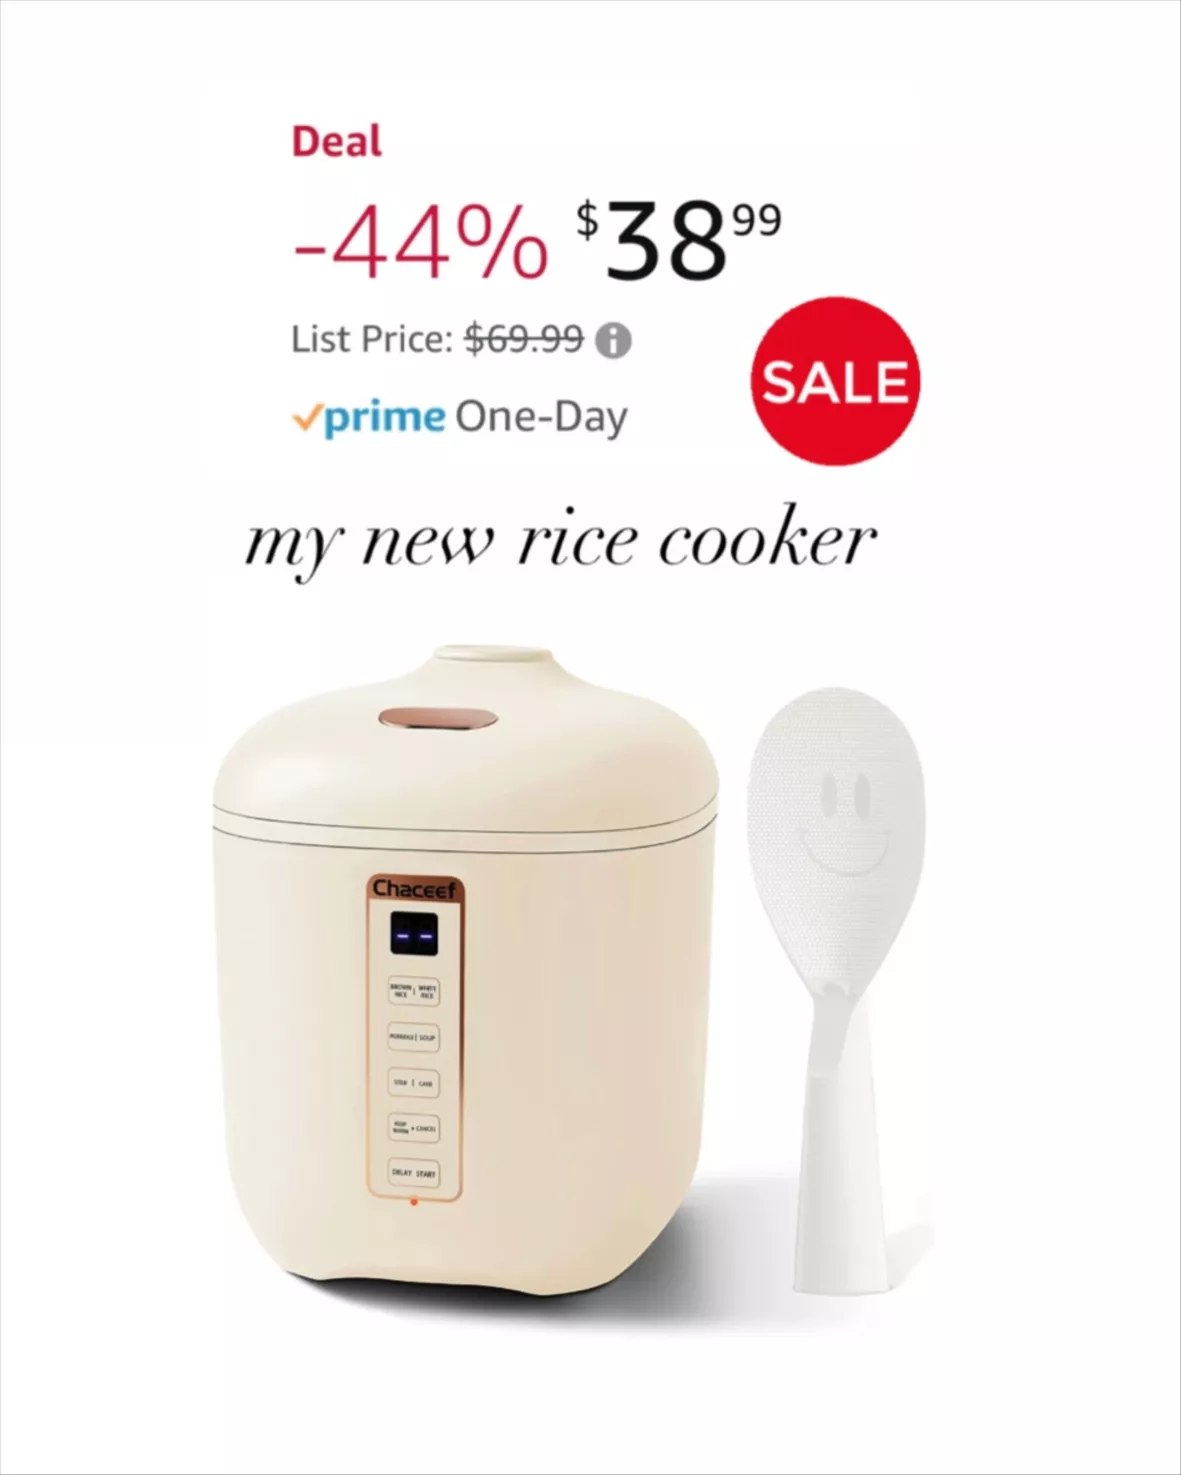 CHACEEF Mini Rice Cooker 2-Cups Uncooked, 1.2L Small Rice Cooker with